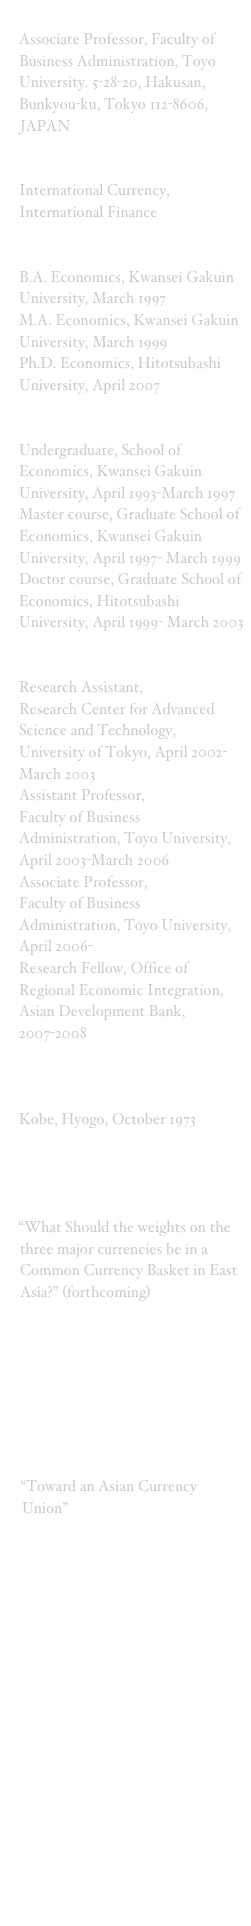 Position: Associate Professor, Faculty of Business Administration, Toyo University. 5-28-20, Hakusan, Bunkyou-ku, Tokyo 112-8606, JAPAN
Research Field: International Currency, International Finance
Degree: B.A. Economics, Kwansei Gakuin University, March 1997M.A. Economics, Kwansei Gakuin University, March 1999
Ph.D. Economics, Hitotsubashi University, April 2007Education: Undergraduate, School of Economics, Kwansei Gakuin University, April 1993-March 1997Master course, Graduate School of Economics, Kwansei Gakuin University, April 1997- March 1999Doctor course, Graduate School of Economics, Hitotsubashi University, April 1999- March 2003Professional Career:Research Assistant, Research Center for Advanced Science and Technology, University of Tokyo, April 2002-March 2003Assistant Professor, Faculty of Business Administration, Toyo University, April 2003-March 2006
Associate Professor, Faculty of Business Administration, Toyo University, April 2006-
Research Fellow, Office of Regional Economic Integration, Asian Development Bank, 2007-2008   Birth Place: Kobe, Hyogo, October 1973Paper issued atAsian Economic Journal“What Should the weights on the three major currencies be in a Common Currency Basket in East Asia?” (forthcoming)JBIC (Japan Bank for International Cooperation)Institute“Possibility to Create a Common Currency Basket for East Asia,”Korea Institute for International Economic Policy “Toward an Asian Currency Union”Faculty of Business Administration, Toyo University“Giving a New life to the PPP theory; Modified G-PPP model”, (in Japanese)Web Links:Kwansei Gakuin UniversityHitotsubashi UniversityTOYO UniversityFaculty of Business Administration, TOYO University 
My Private page